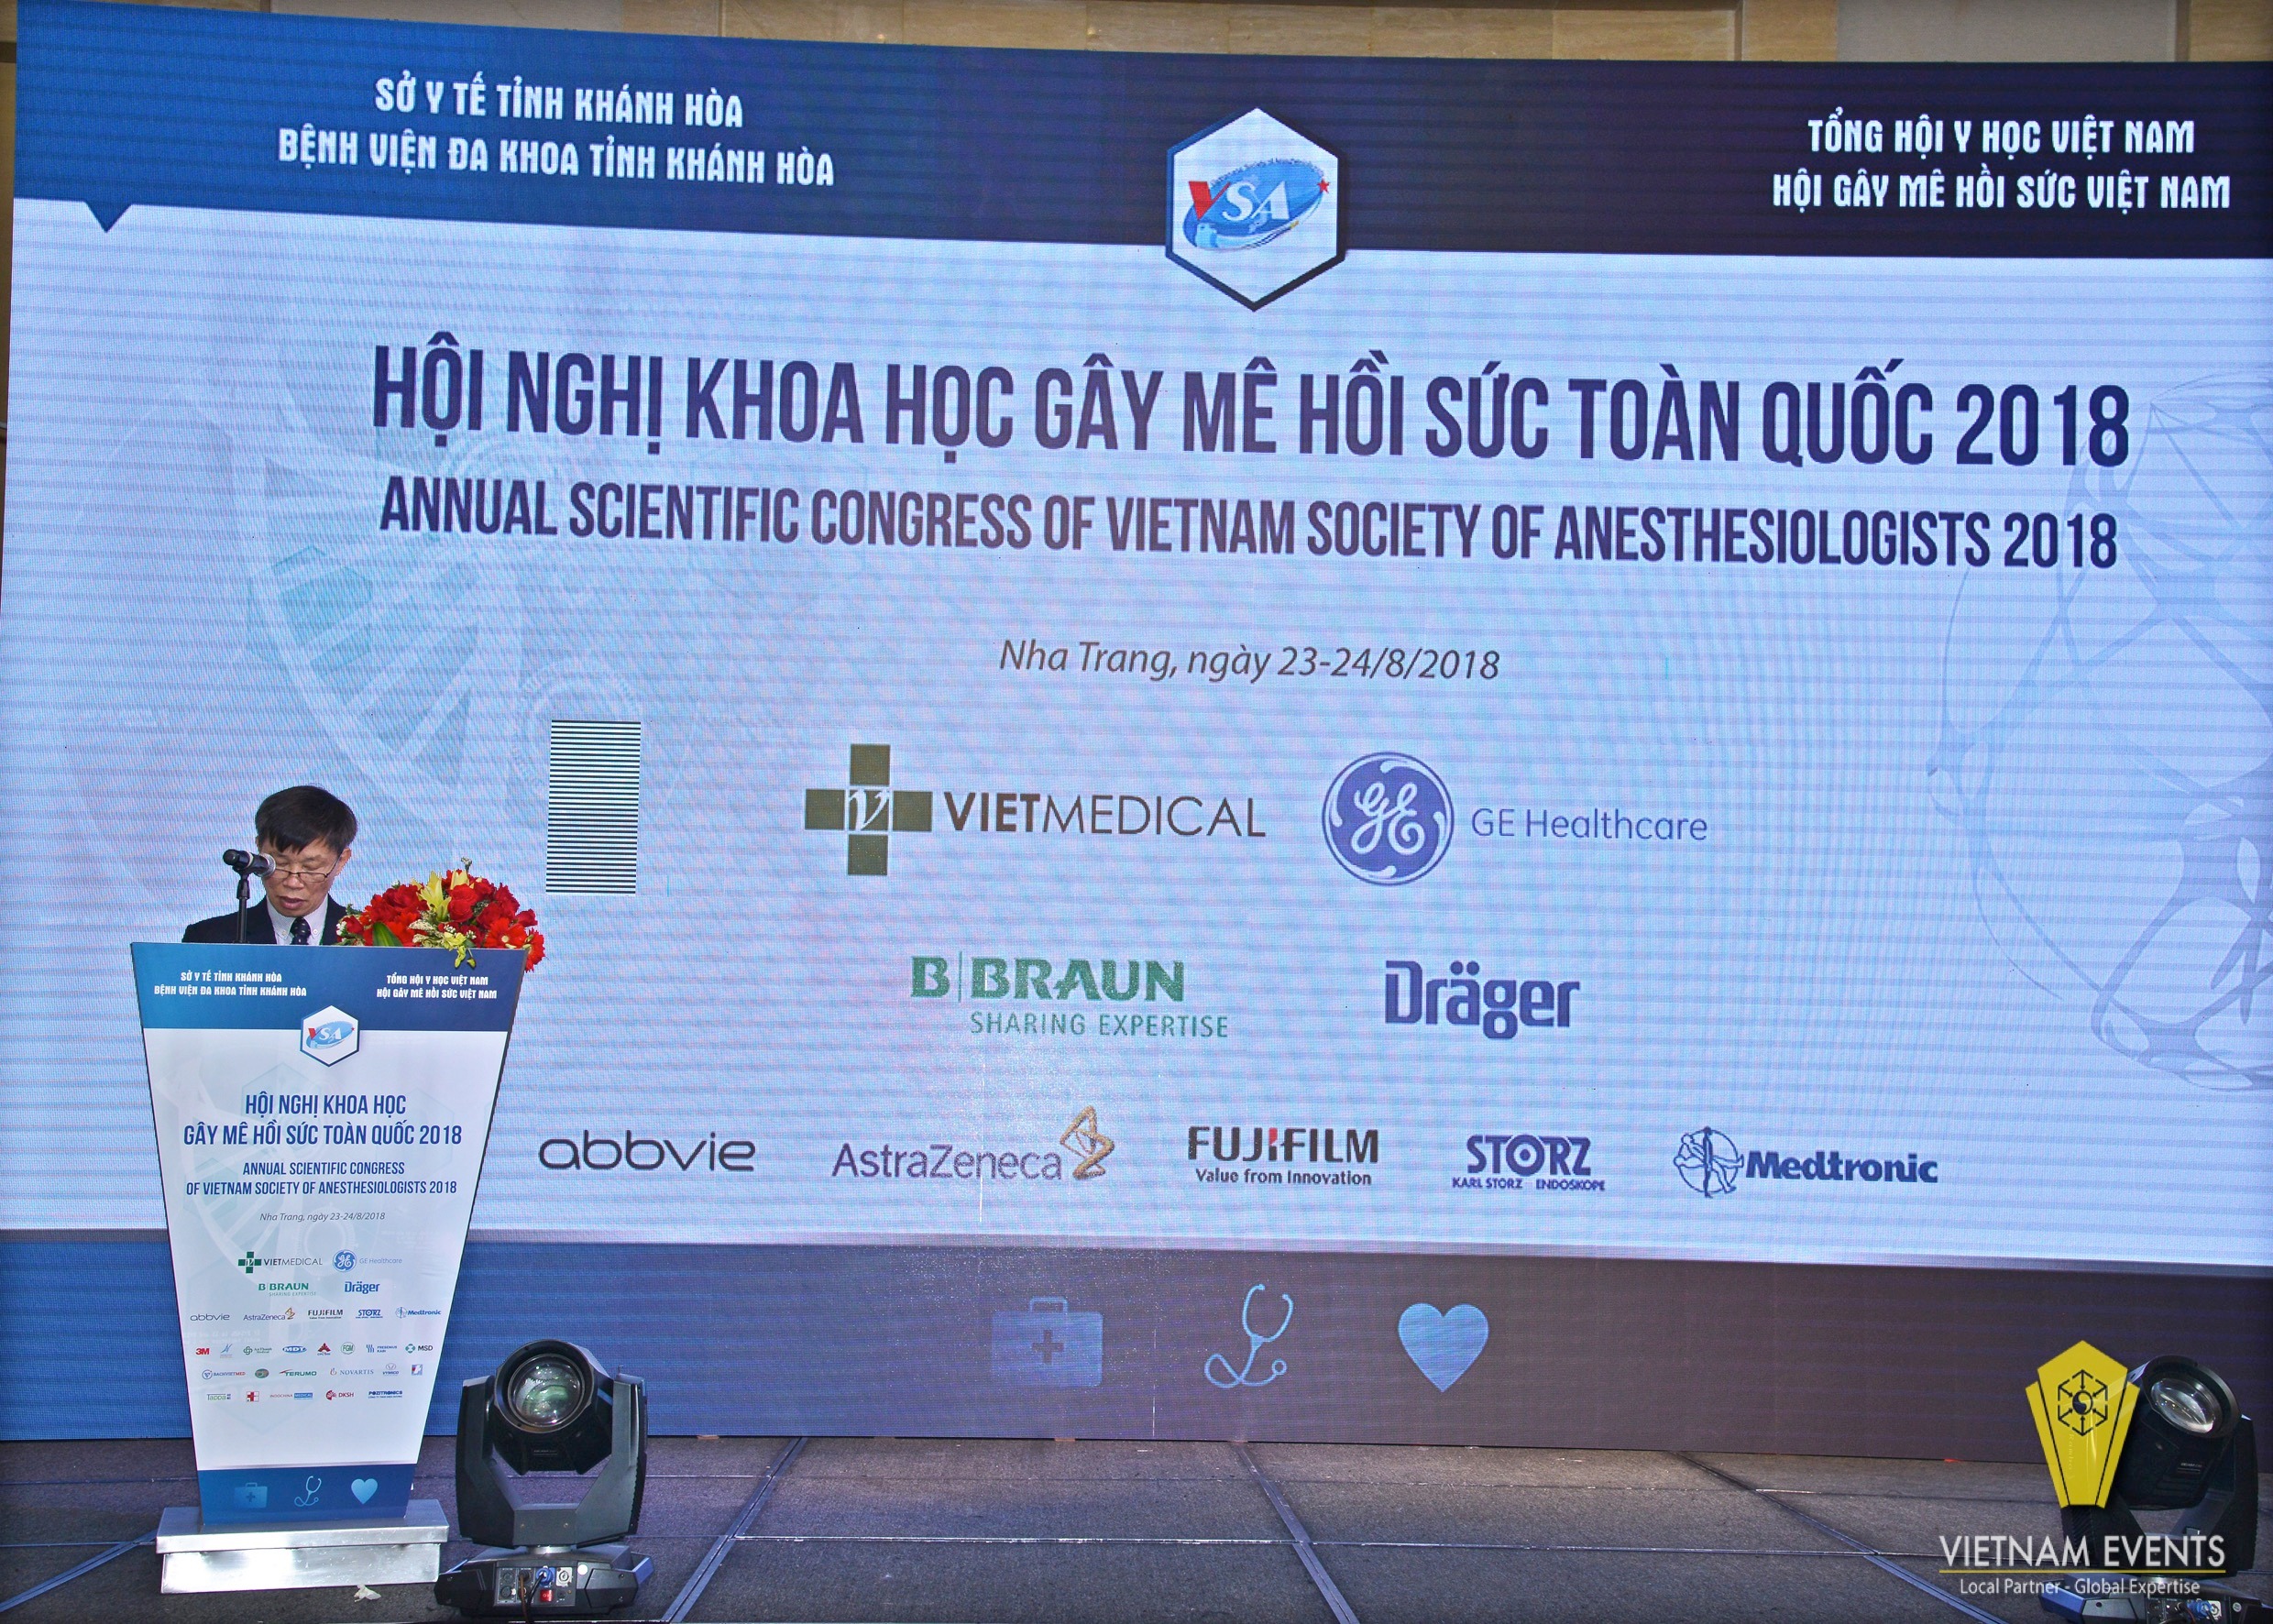 Annual Scientific Congress of Vietnam Society of Anesthesiologist 2018